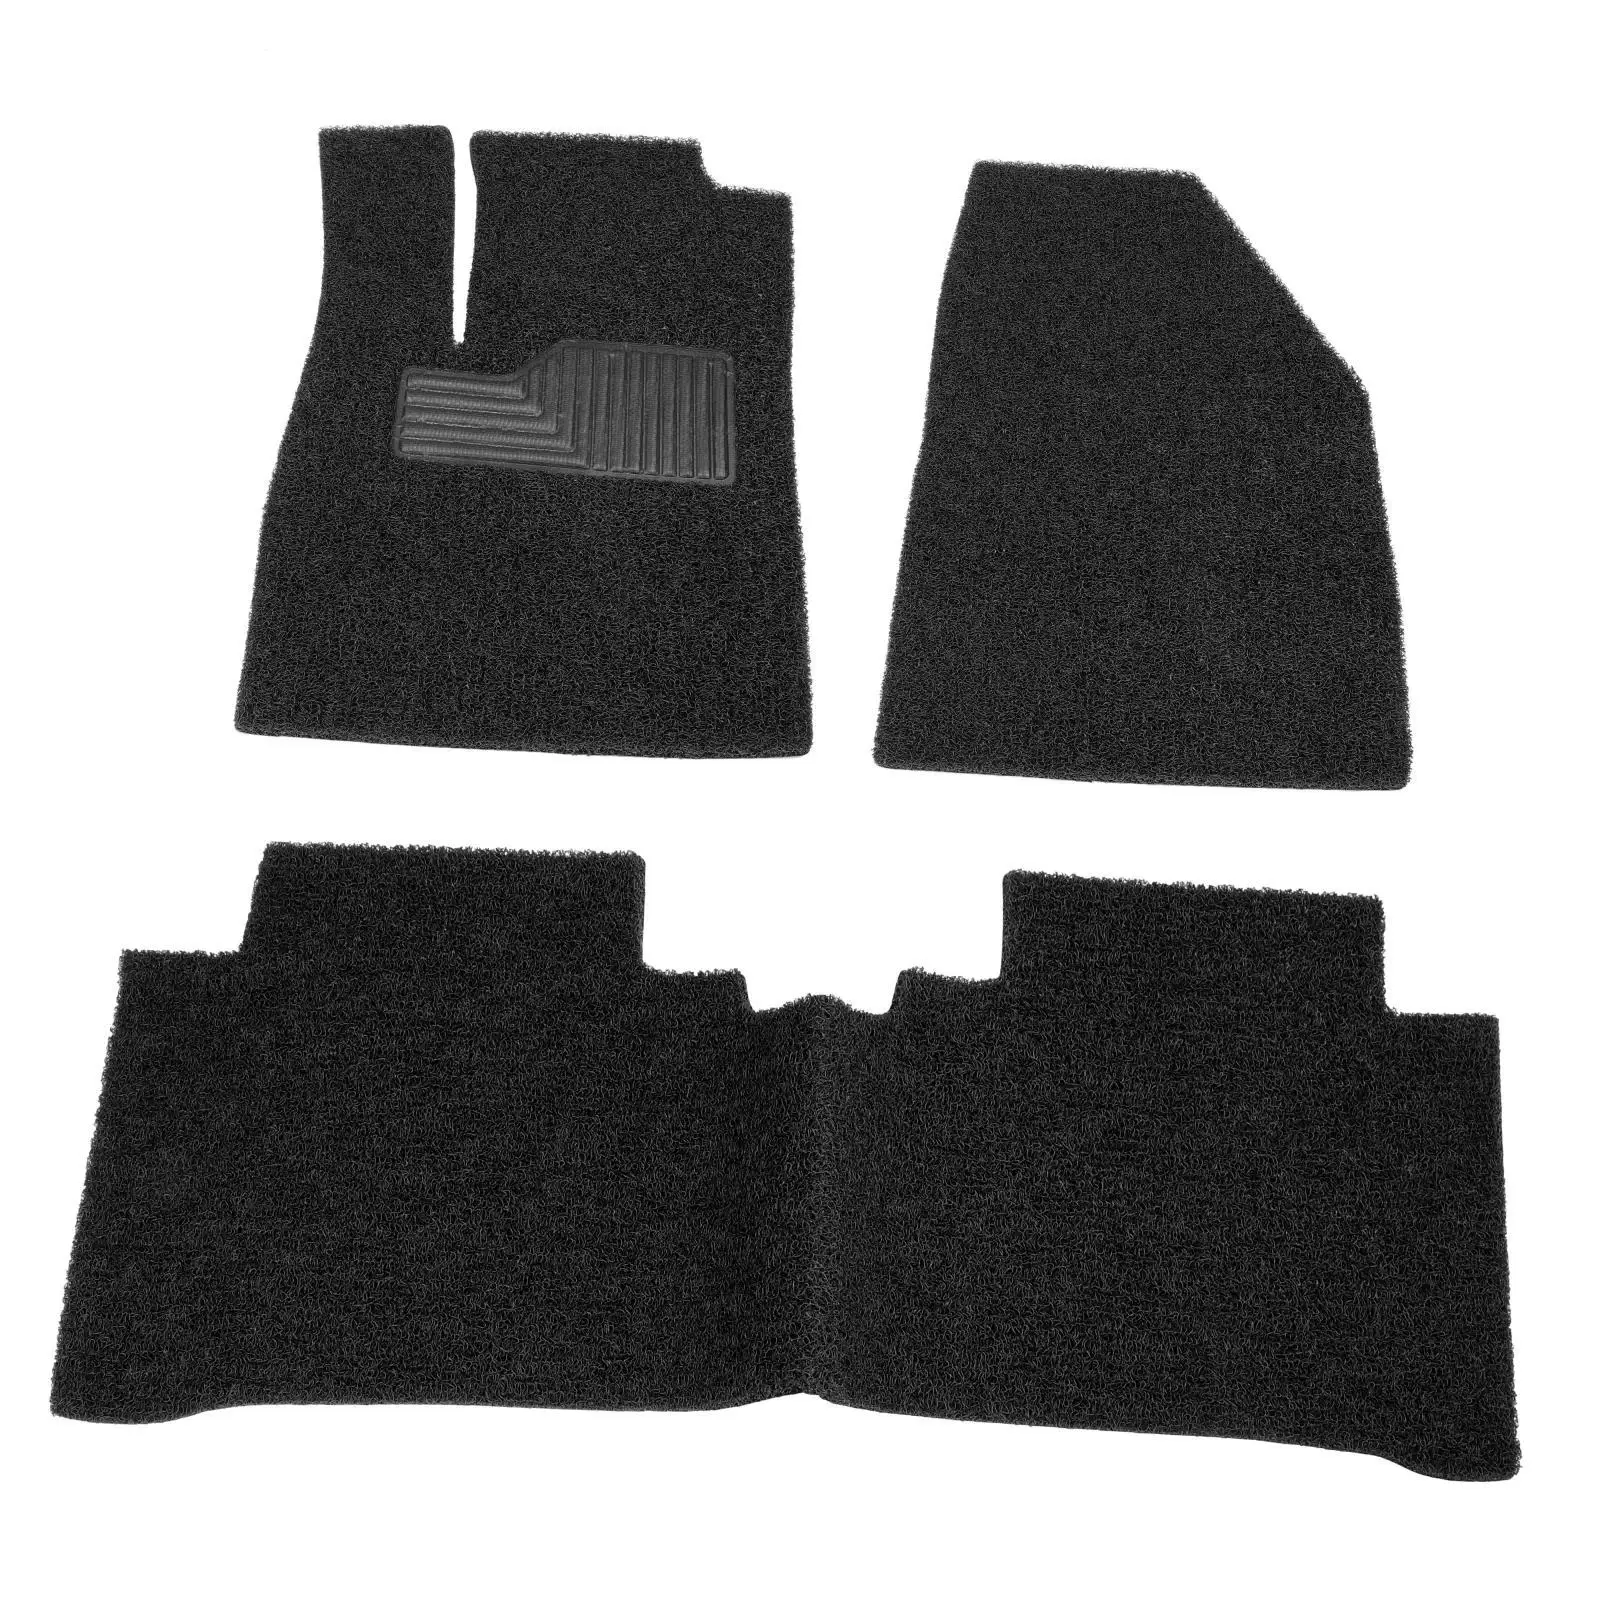 3Pcs Automotive Floor Mats Practical Portable Easy to Clean Protection Durable for Byd Yuan Plus Atto 3 21-23